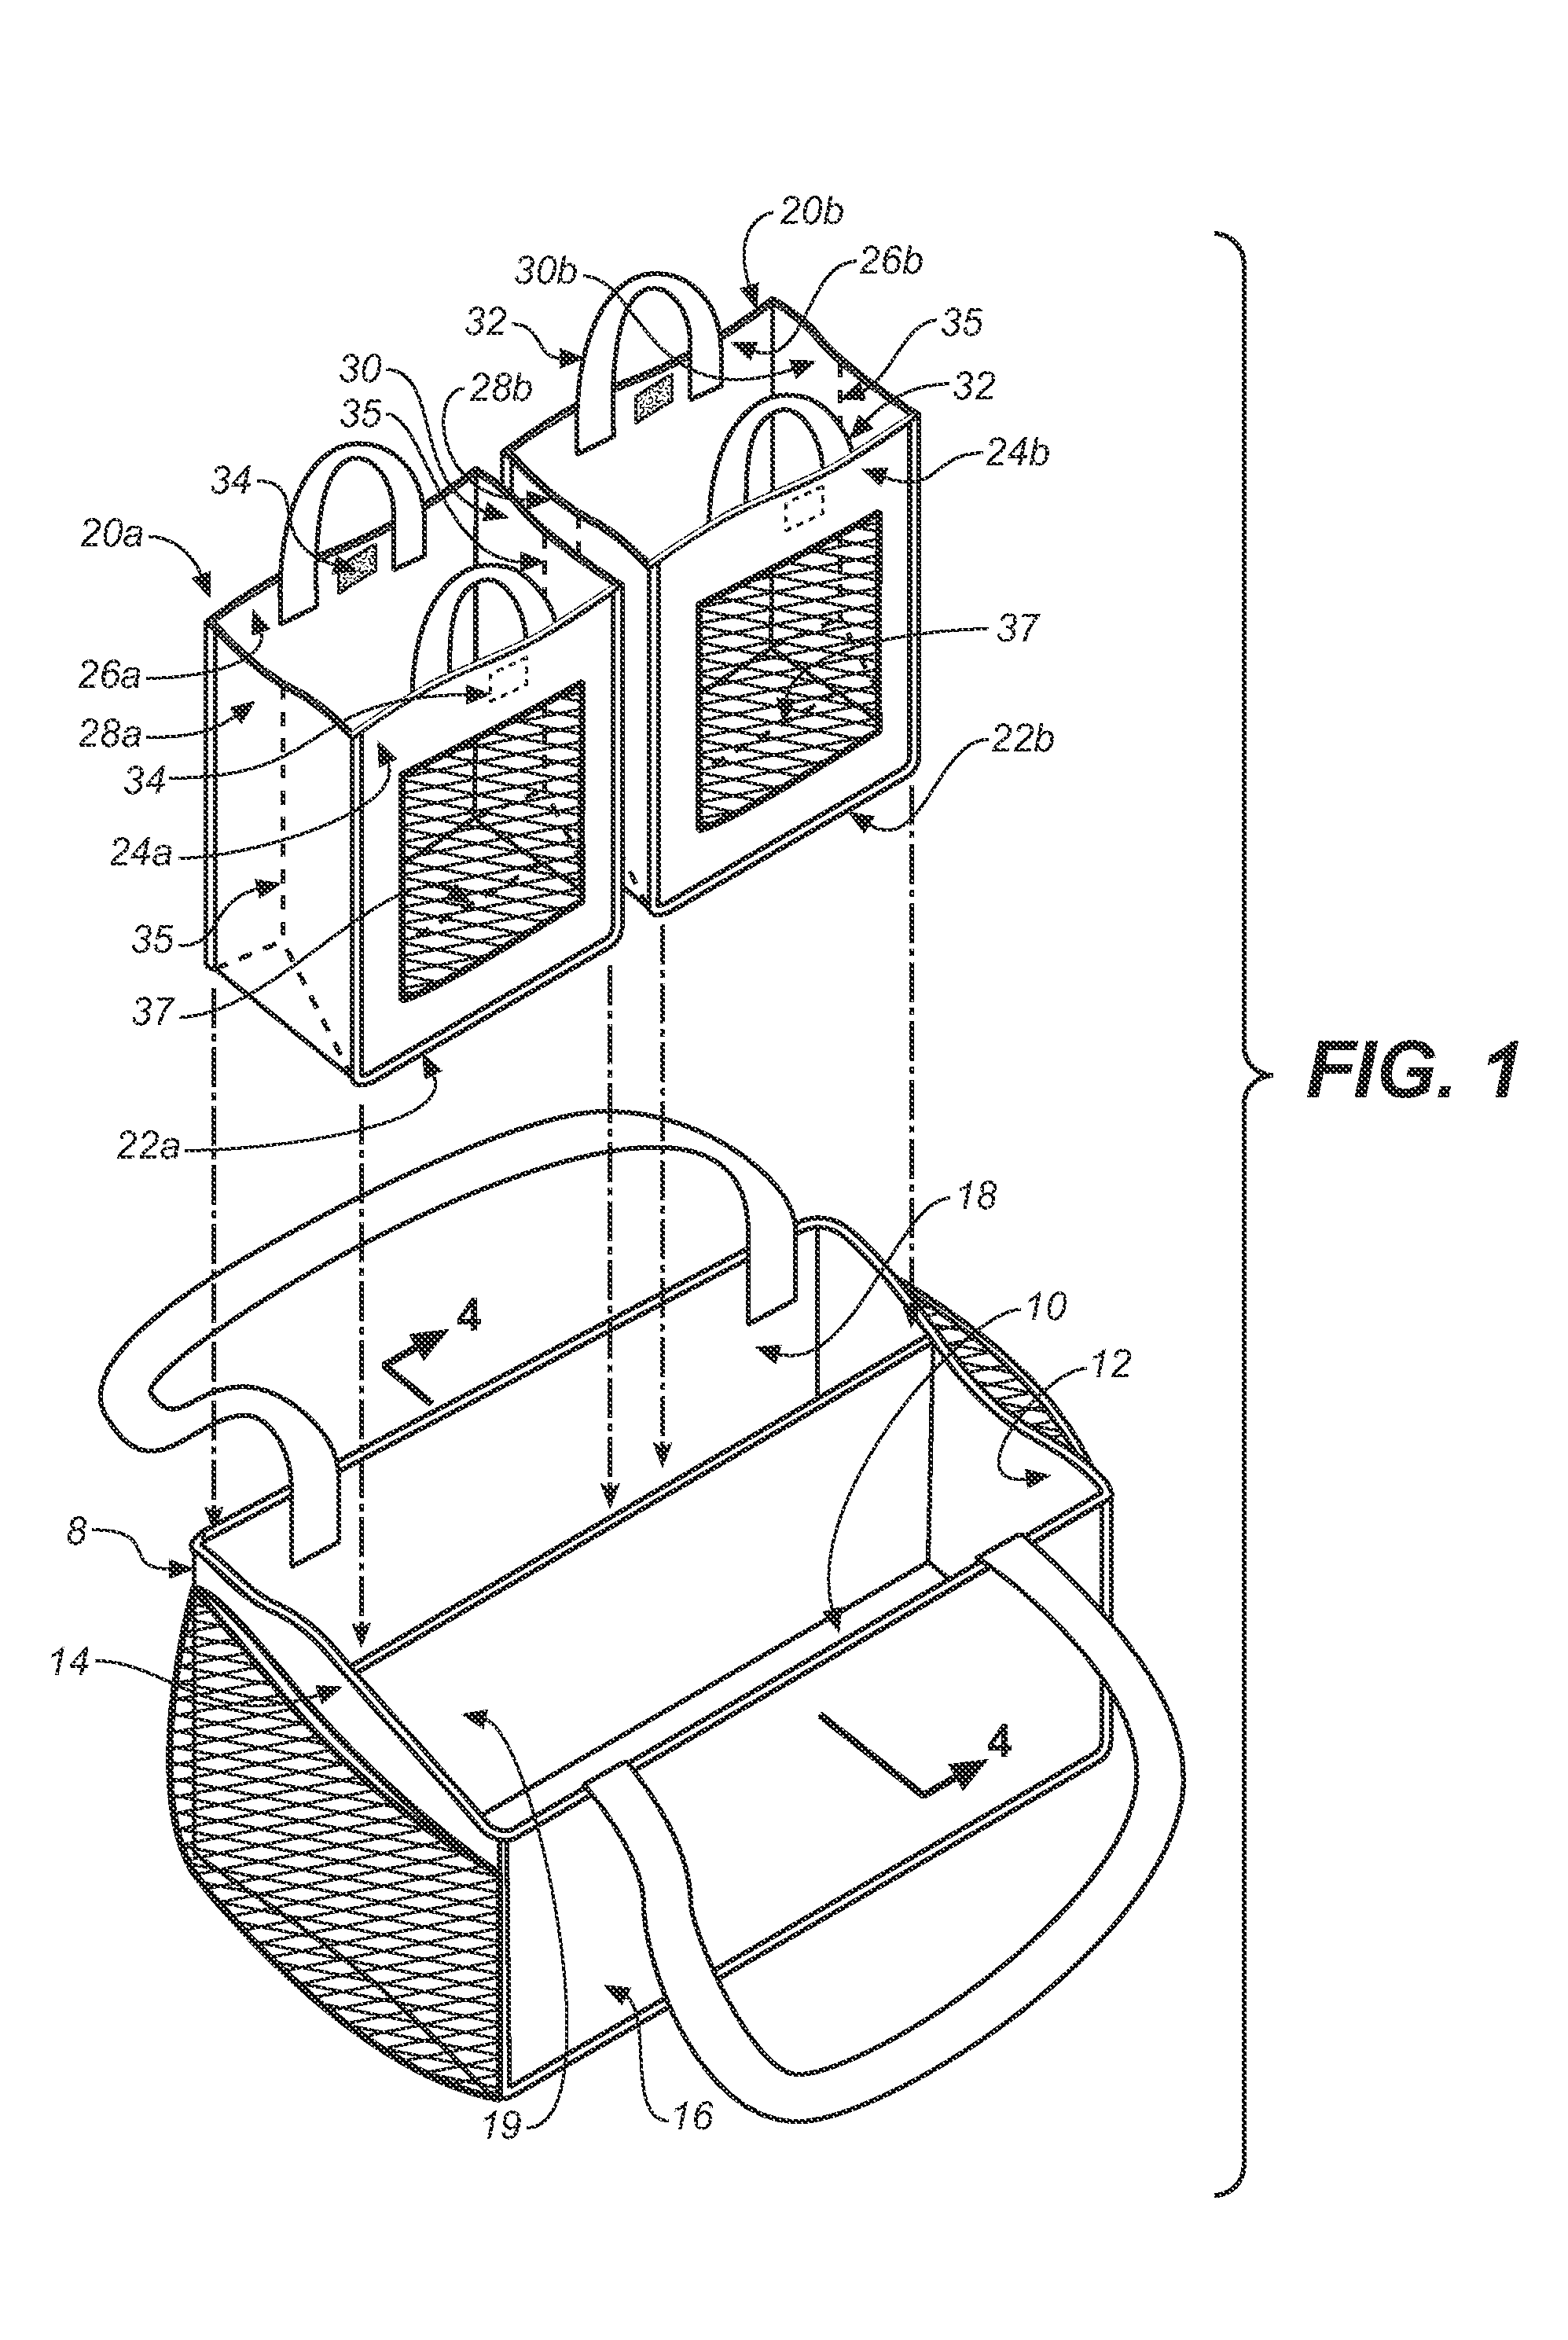 Reusable produce and bulk-item shopping system and related sales method